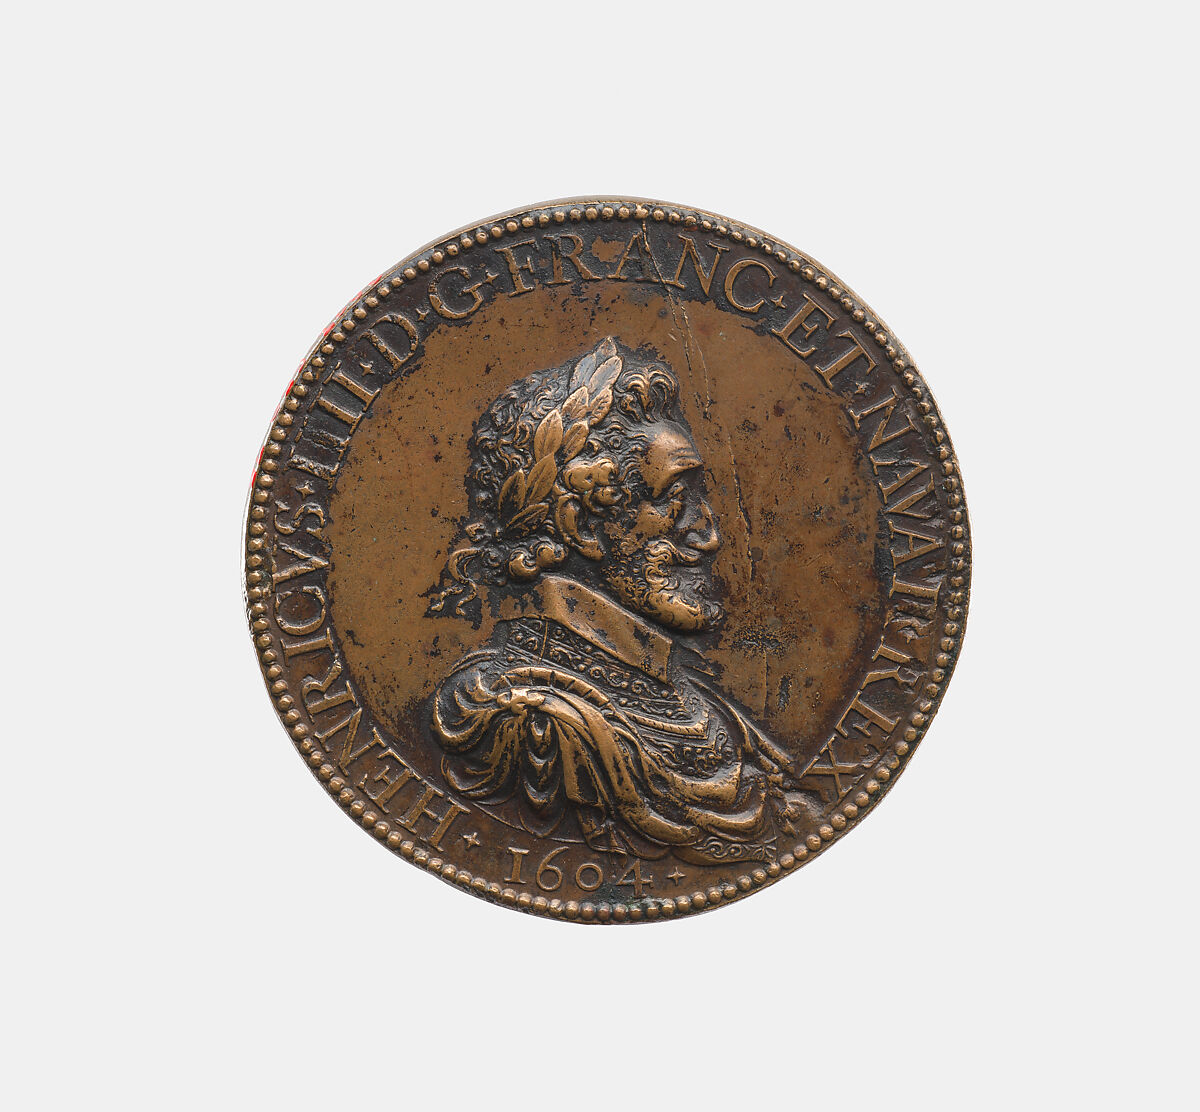 Henry IV 1553-1610, King of France 1589-1610, Guillaume Dupré (French, 1579–1640), Bronze, French, Paris 